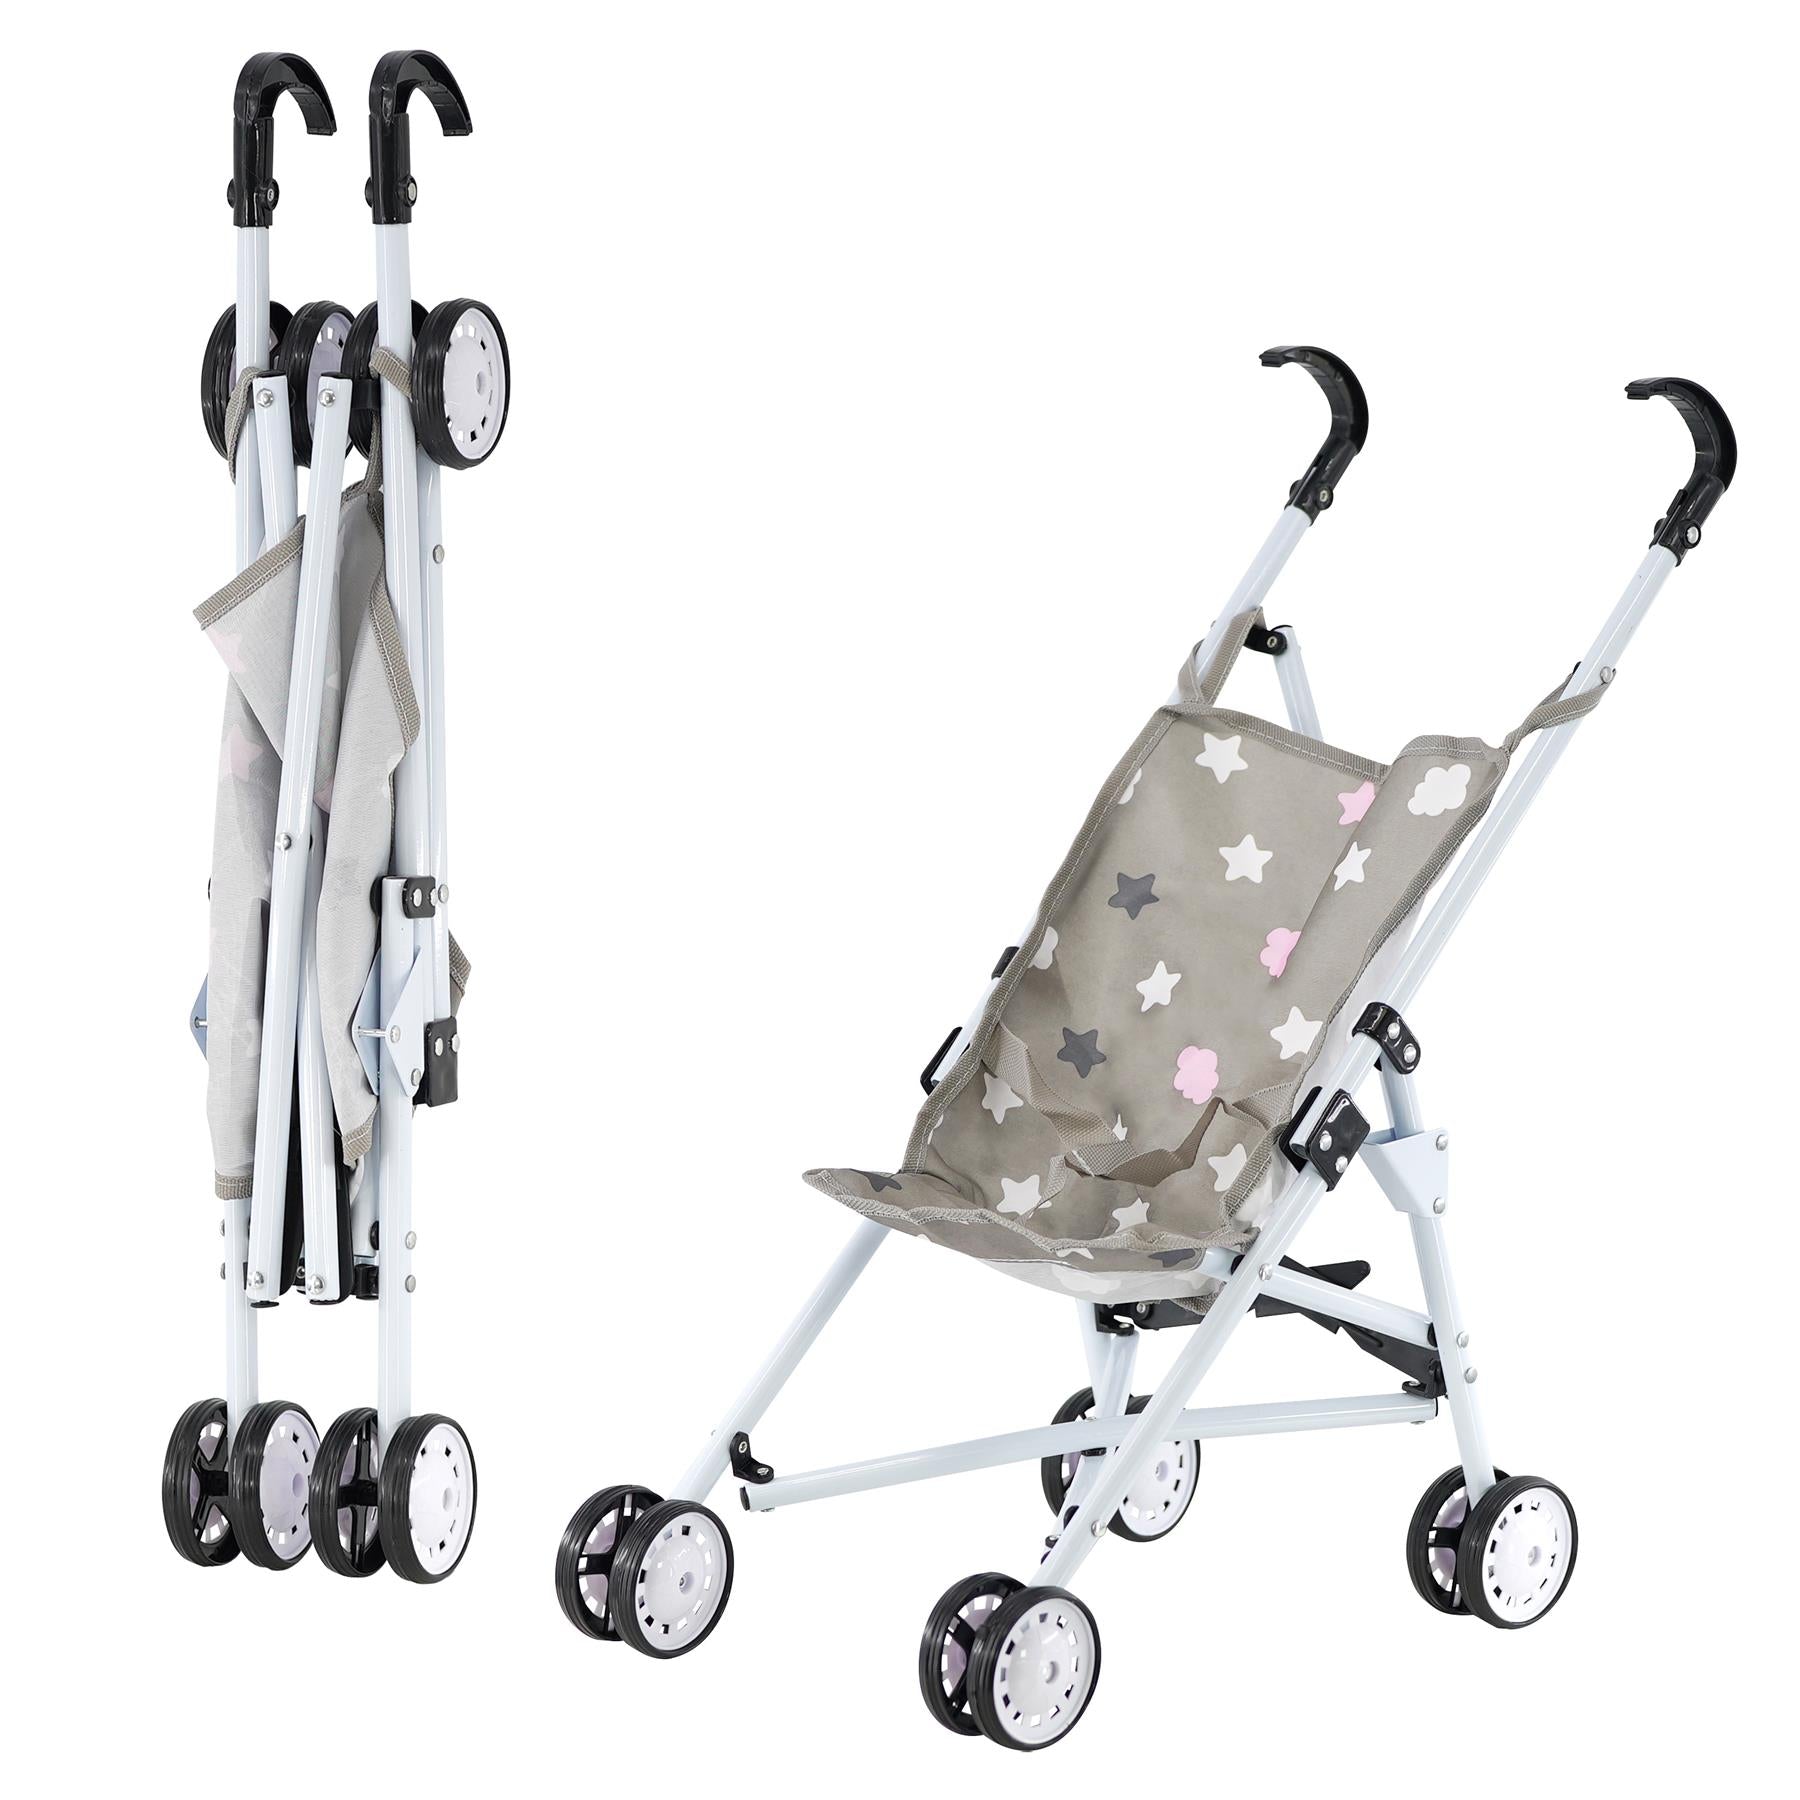 Stars Baby Doll Foldable Stroller by BiBi Doll - The Magic Toy Shop